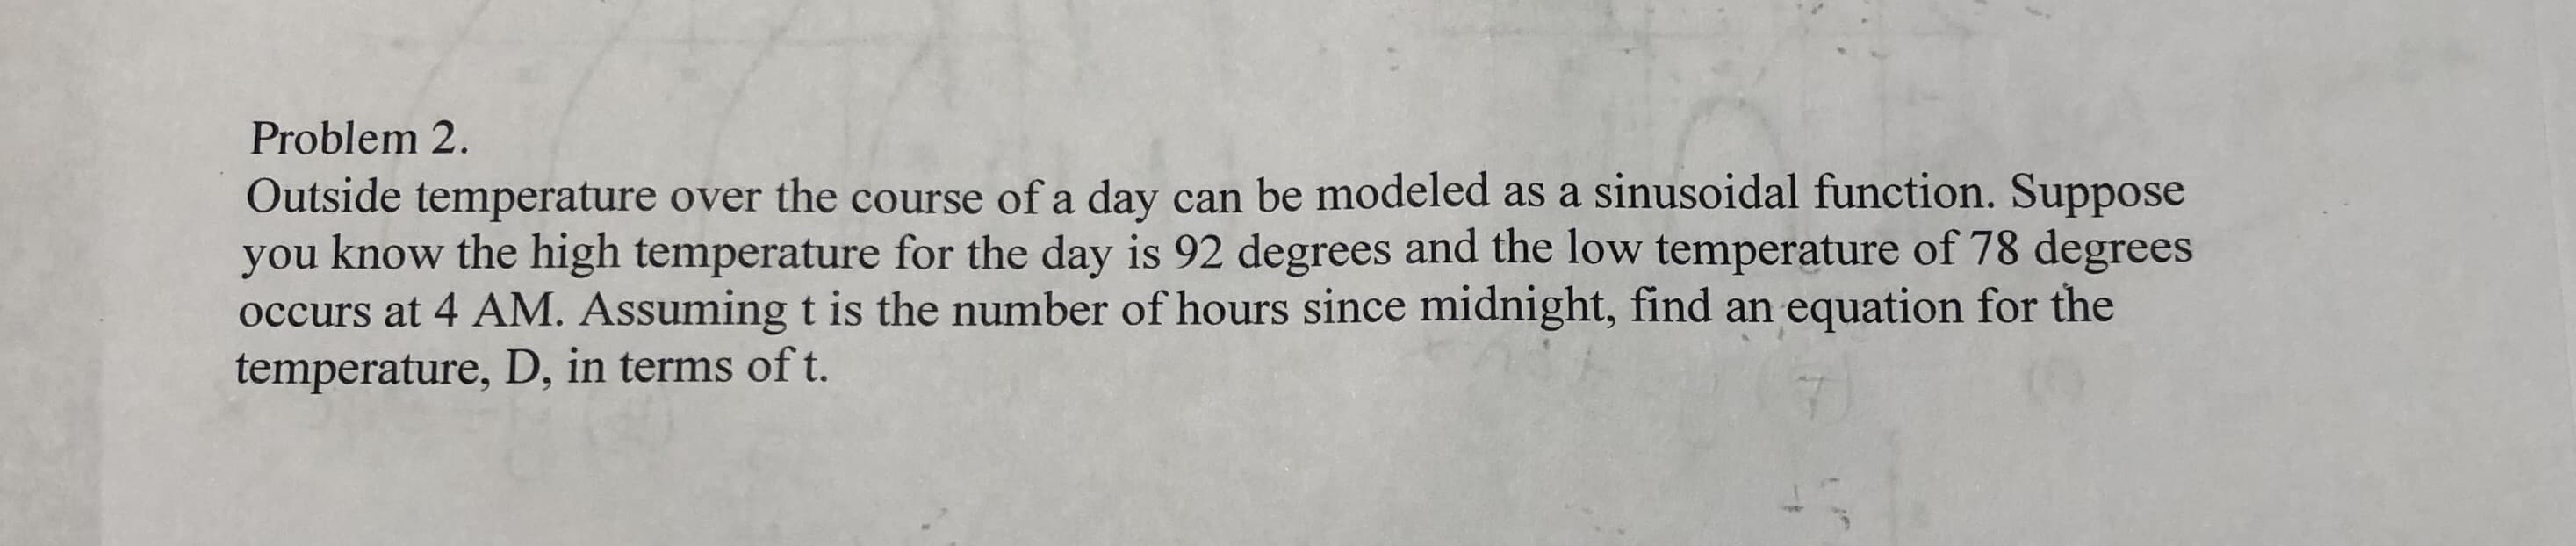 Problem 2.
Outside temperature over the course of a day can be modeled as a sinusoidal function. Suppose
you know the high temperature for the day is 92 degrees and the low temperature of 78 degrees
occurs at 4 AM. Assuming t is the number of hours since midnight, find an equation for the
temperature, D, in terms of t.
